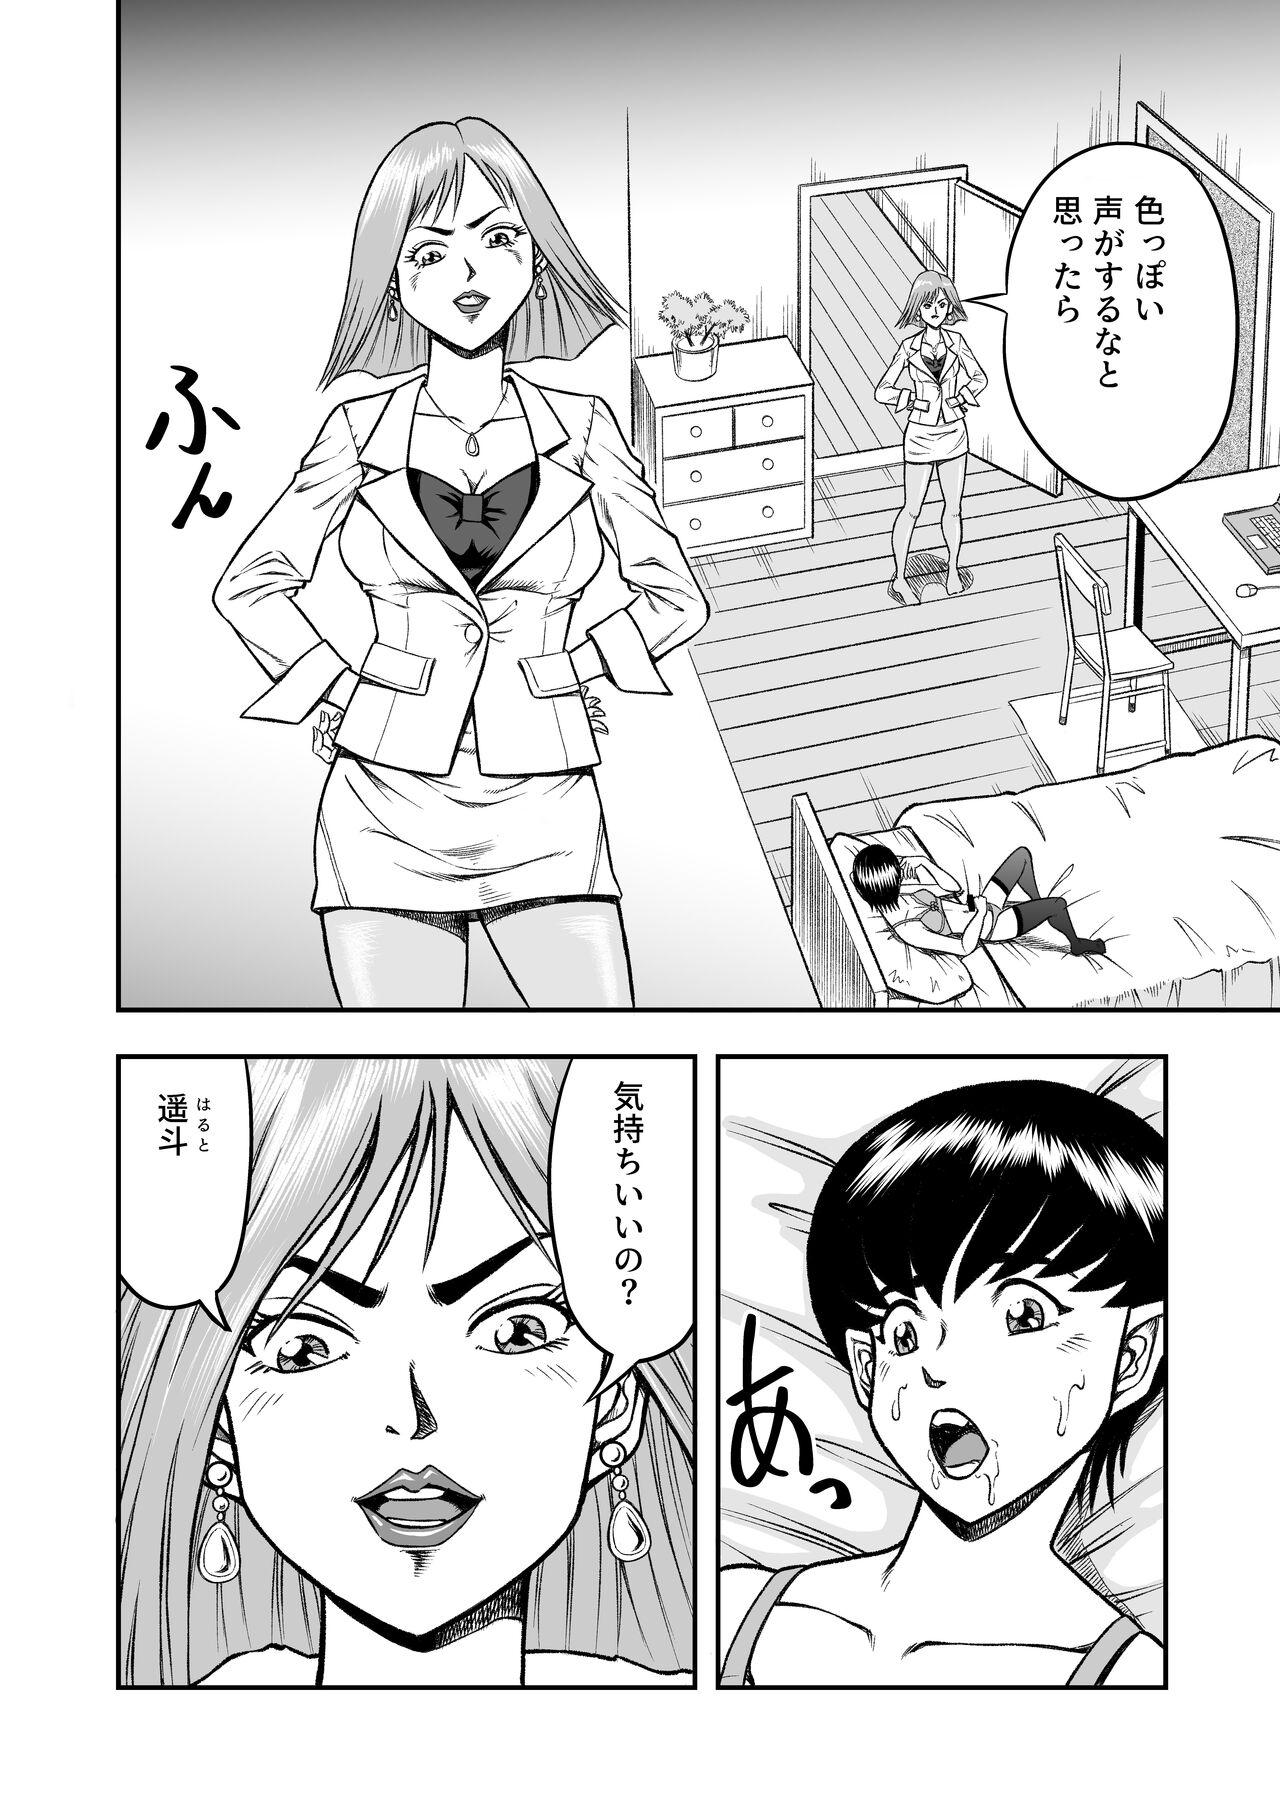 Lingerie OwnWillボクがアタシになったとき 総集編 - Original Stepfamily - Page 8